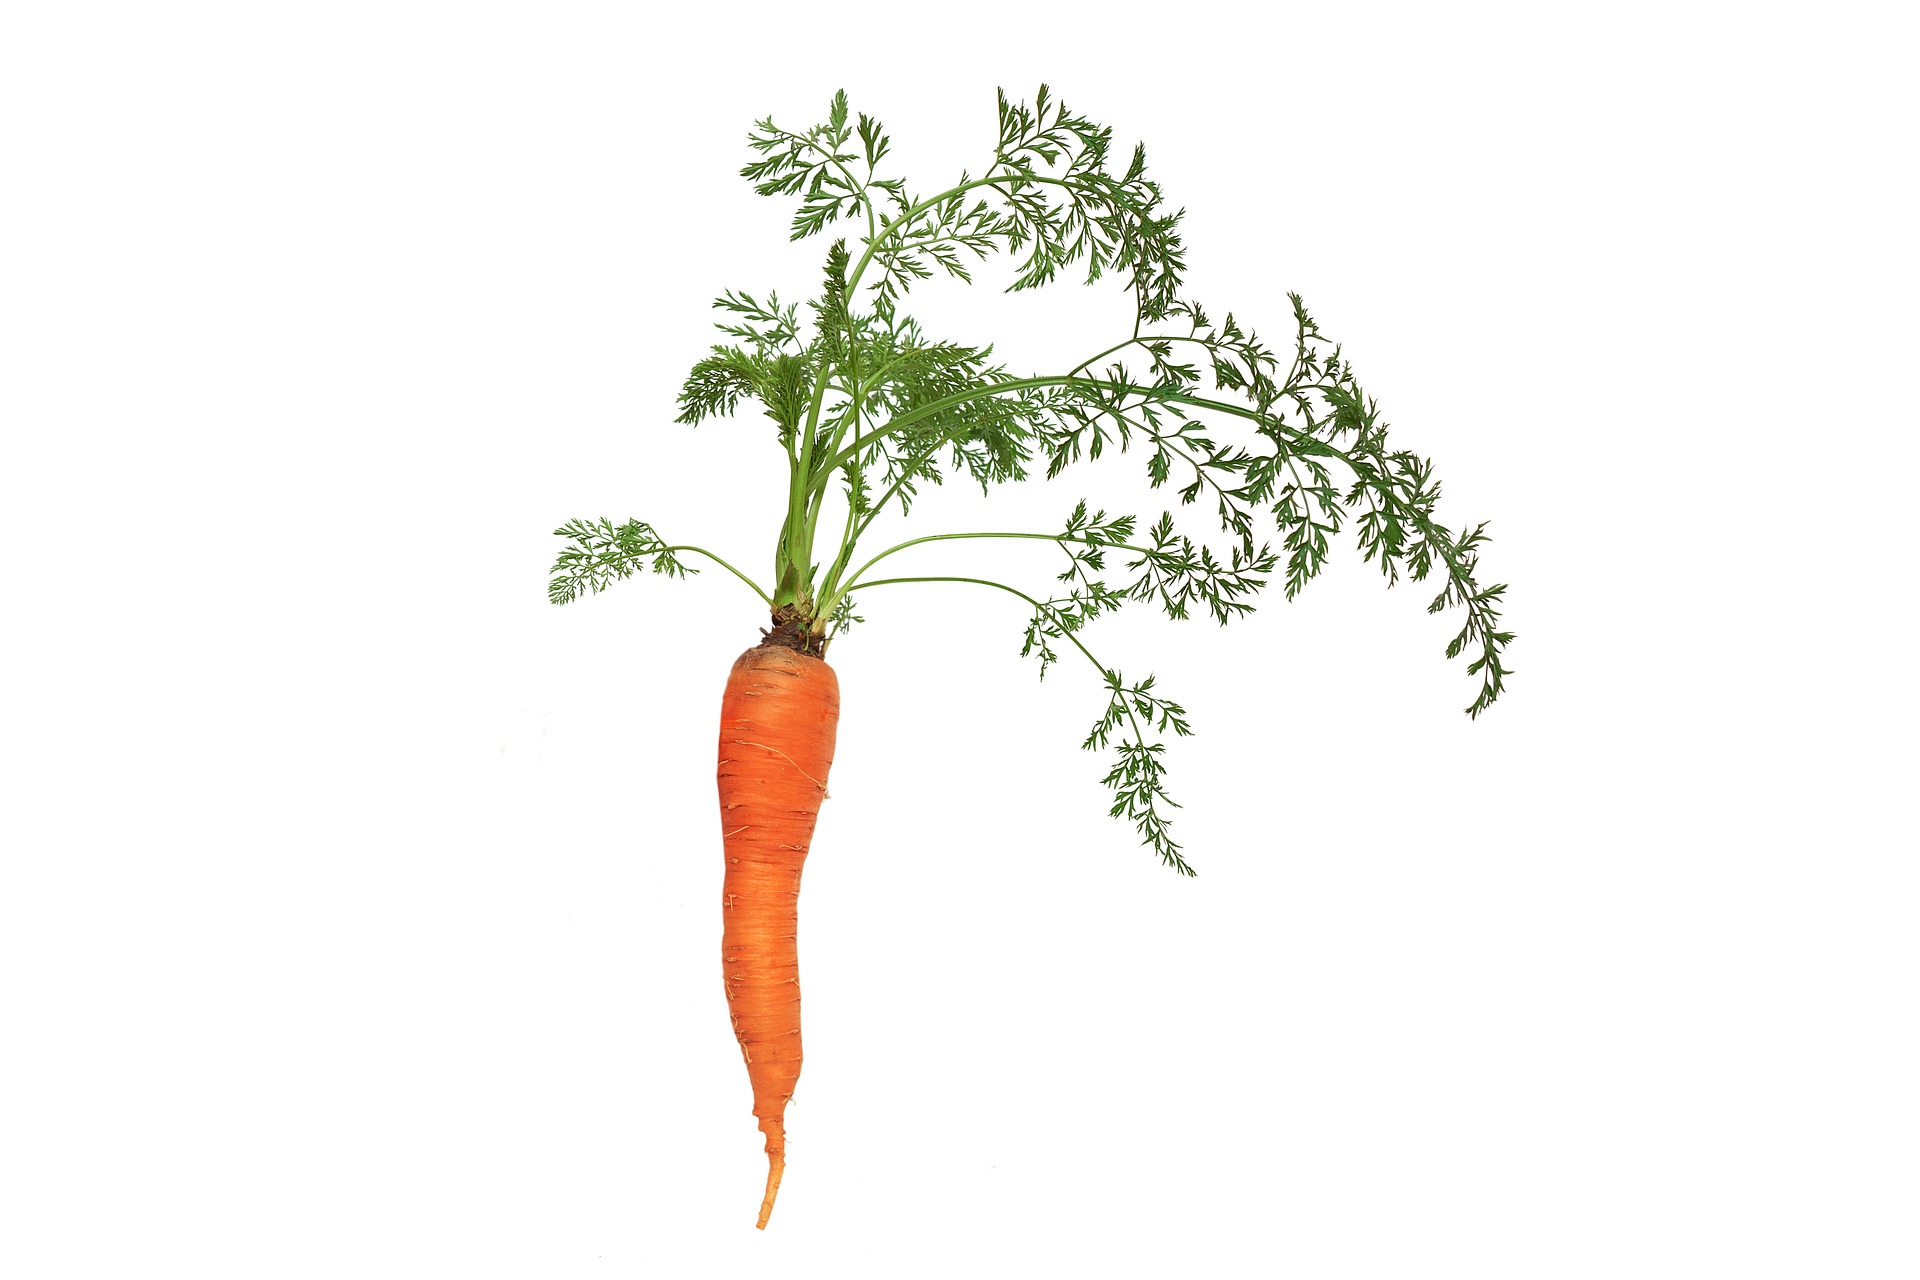 carrot with leaves